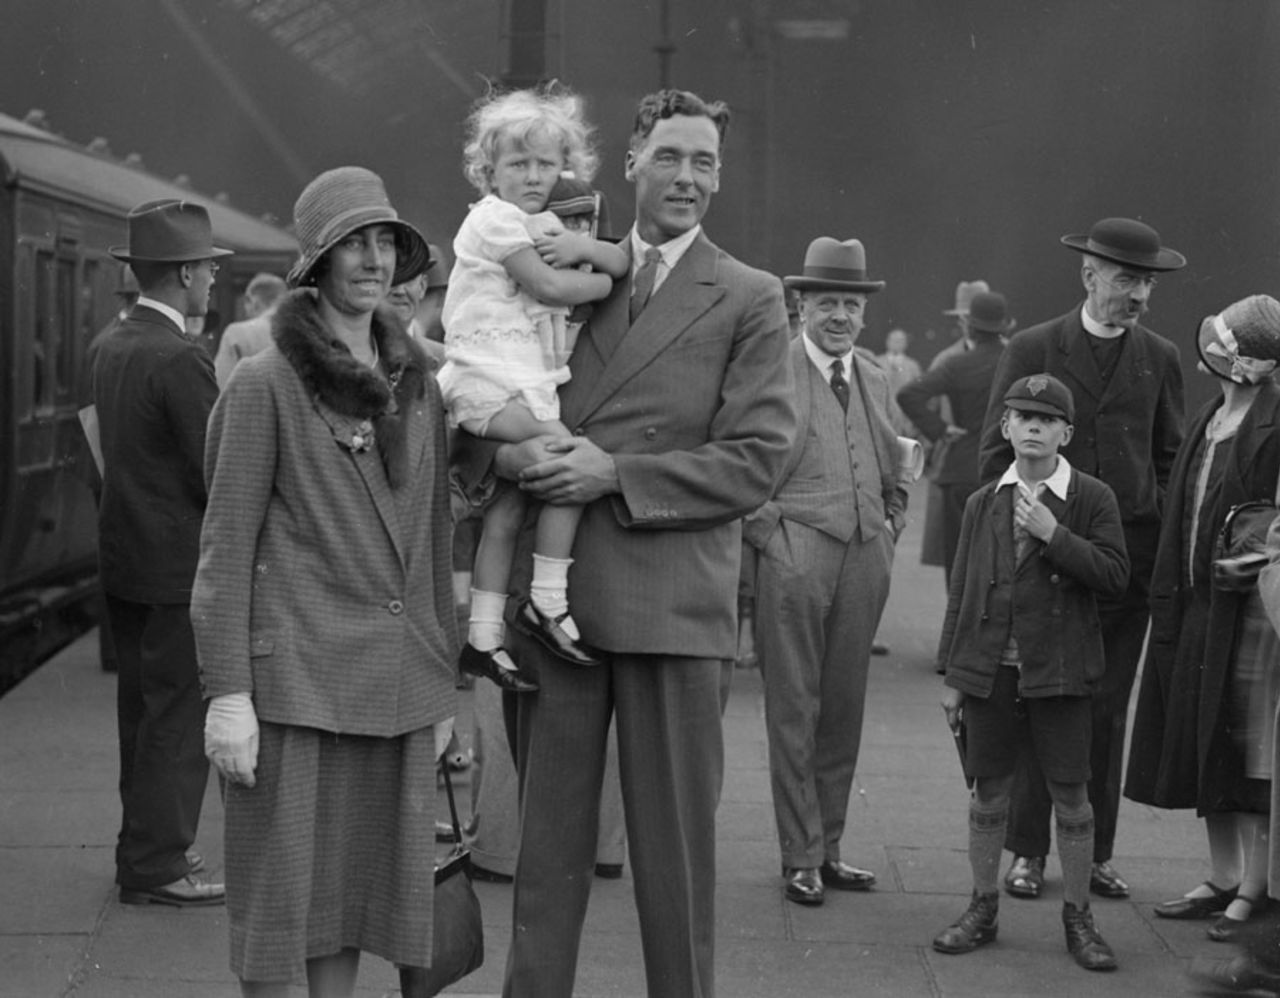 Frank Woolley with his wife and daughter  as he sets off on tour to New Zealand, St Pancras Station, London, September 29, 1929